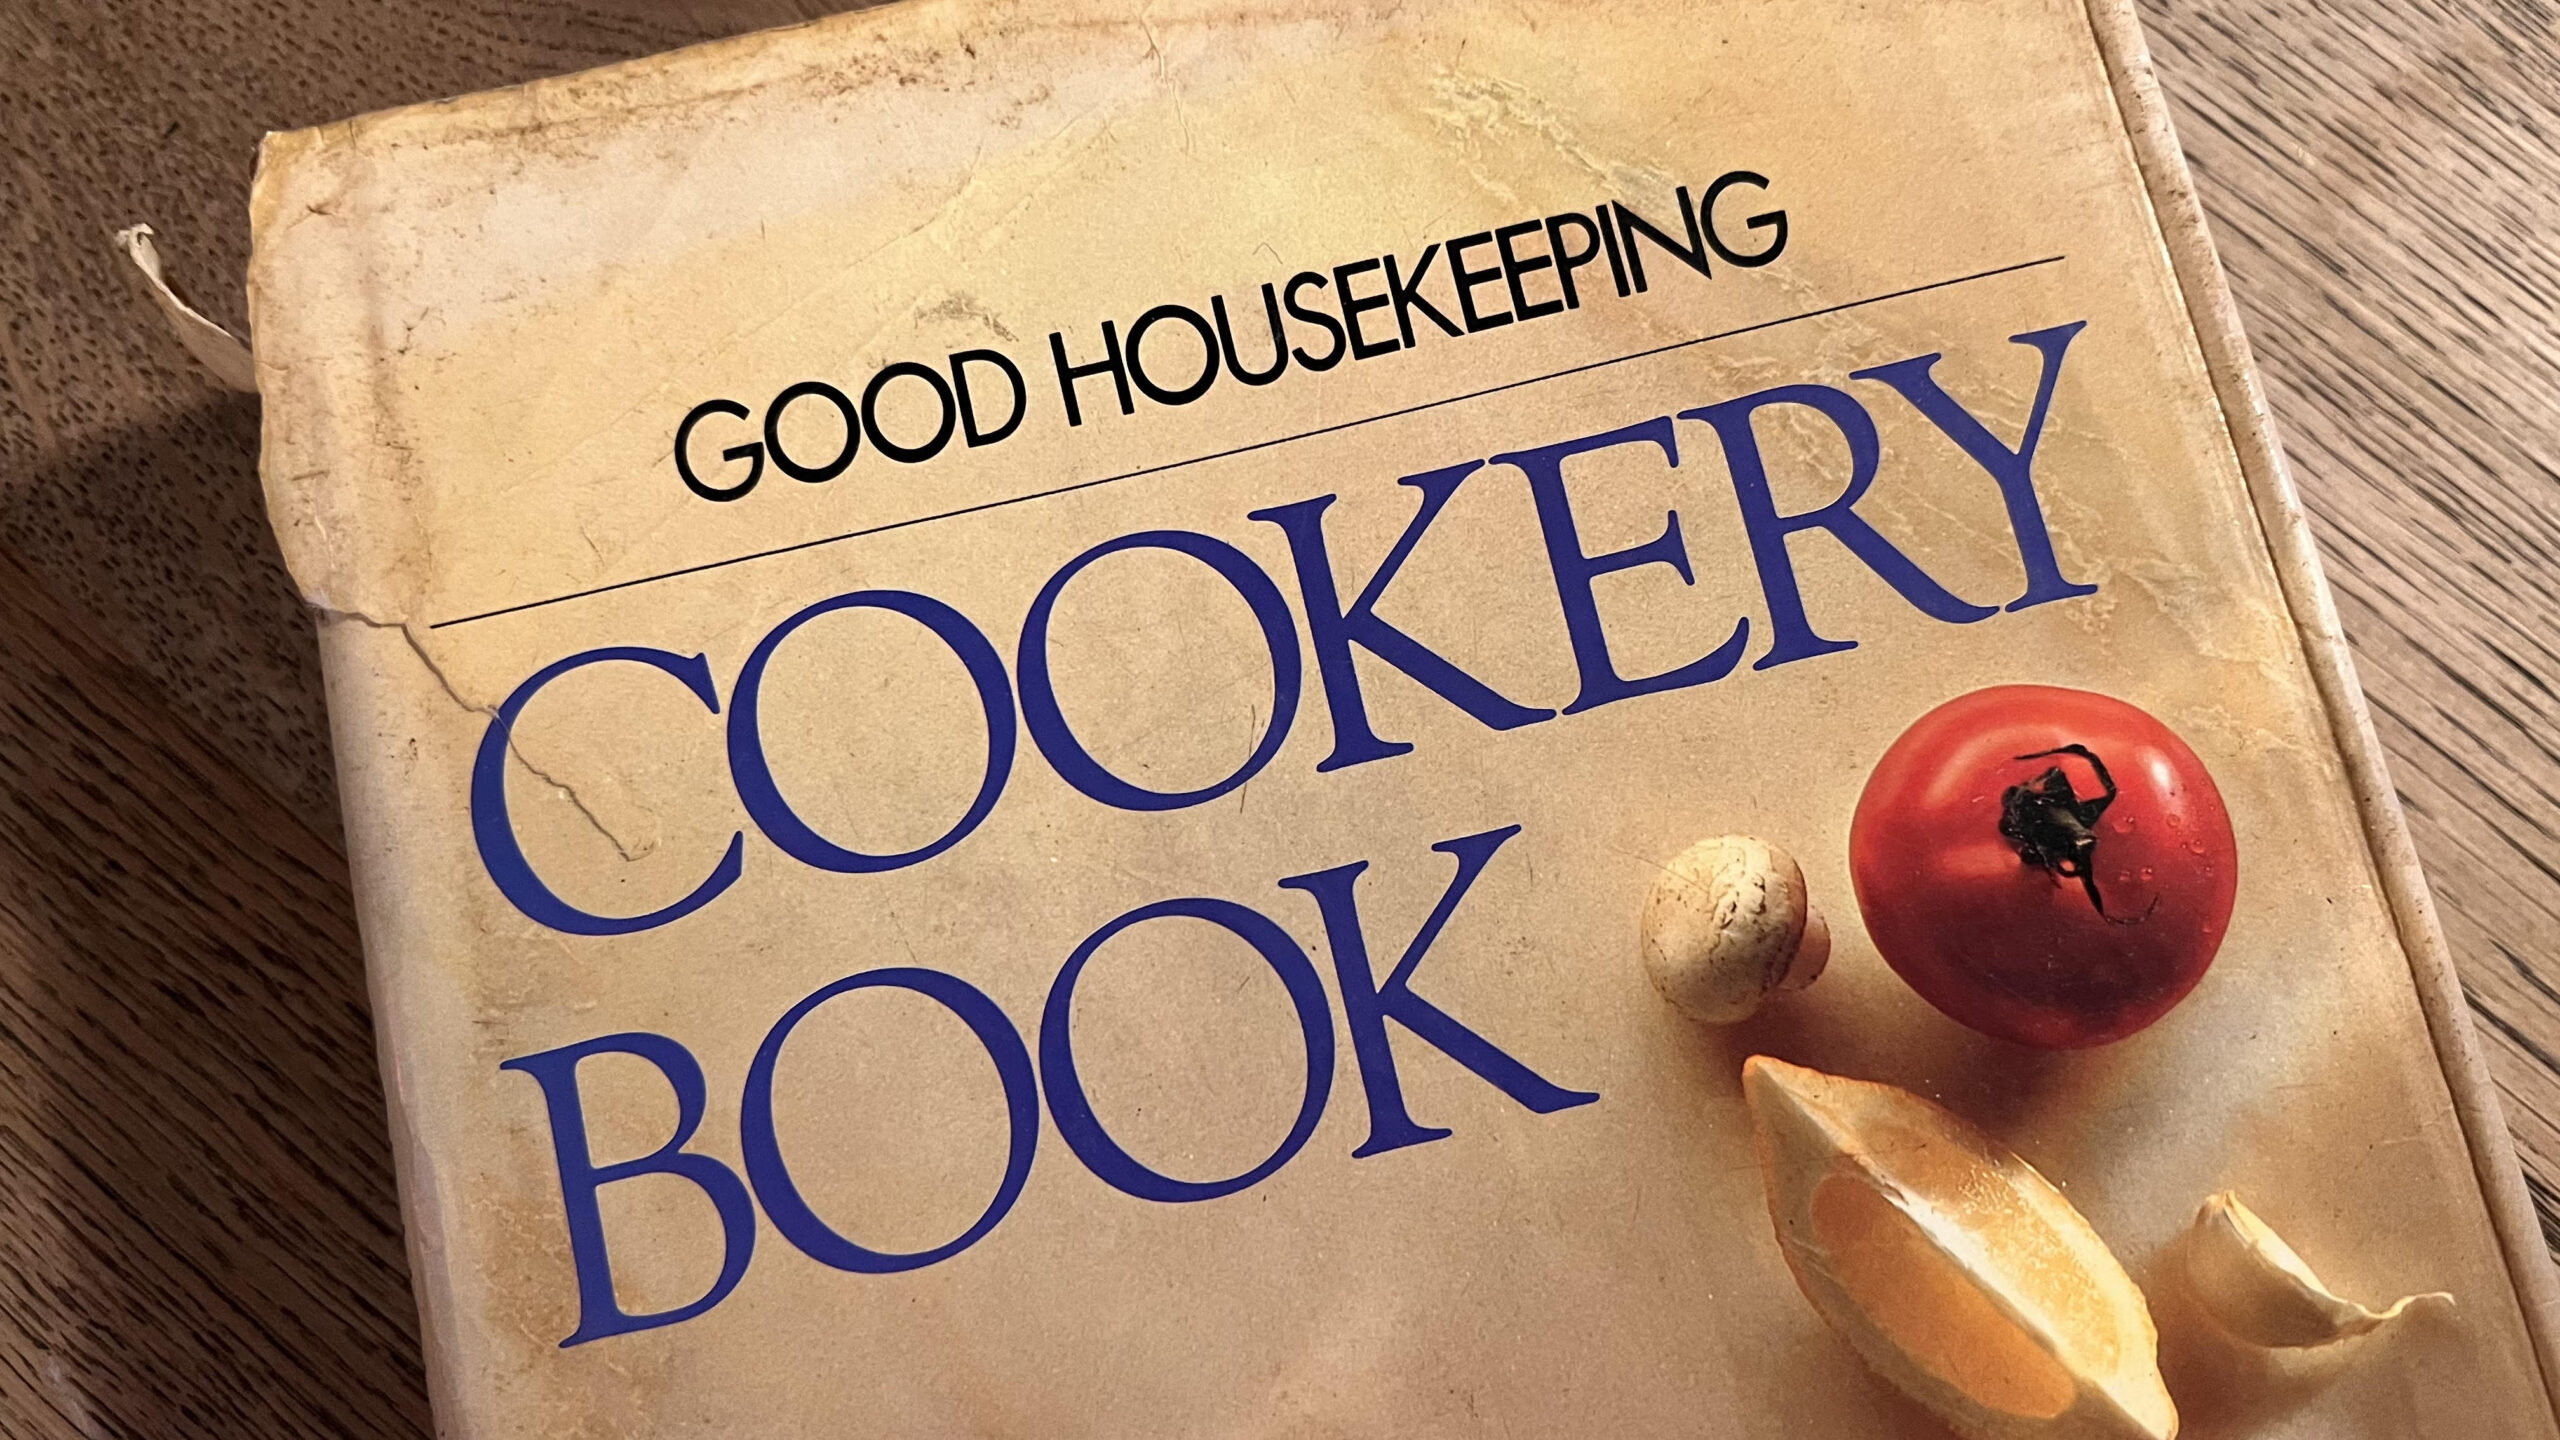 The Good Housekeeping cookery book.